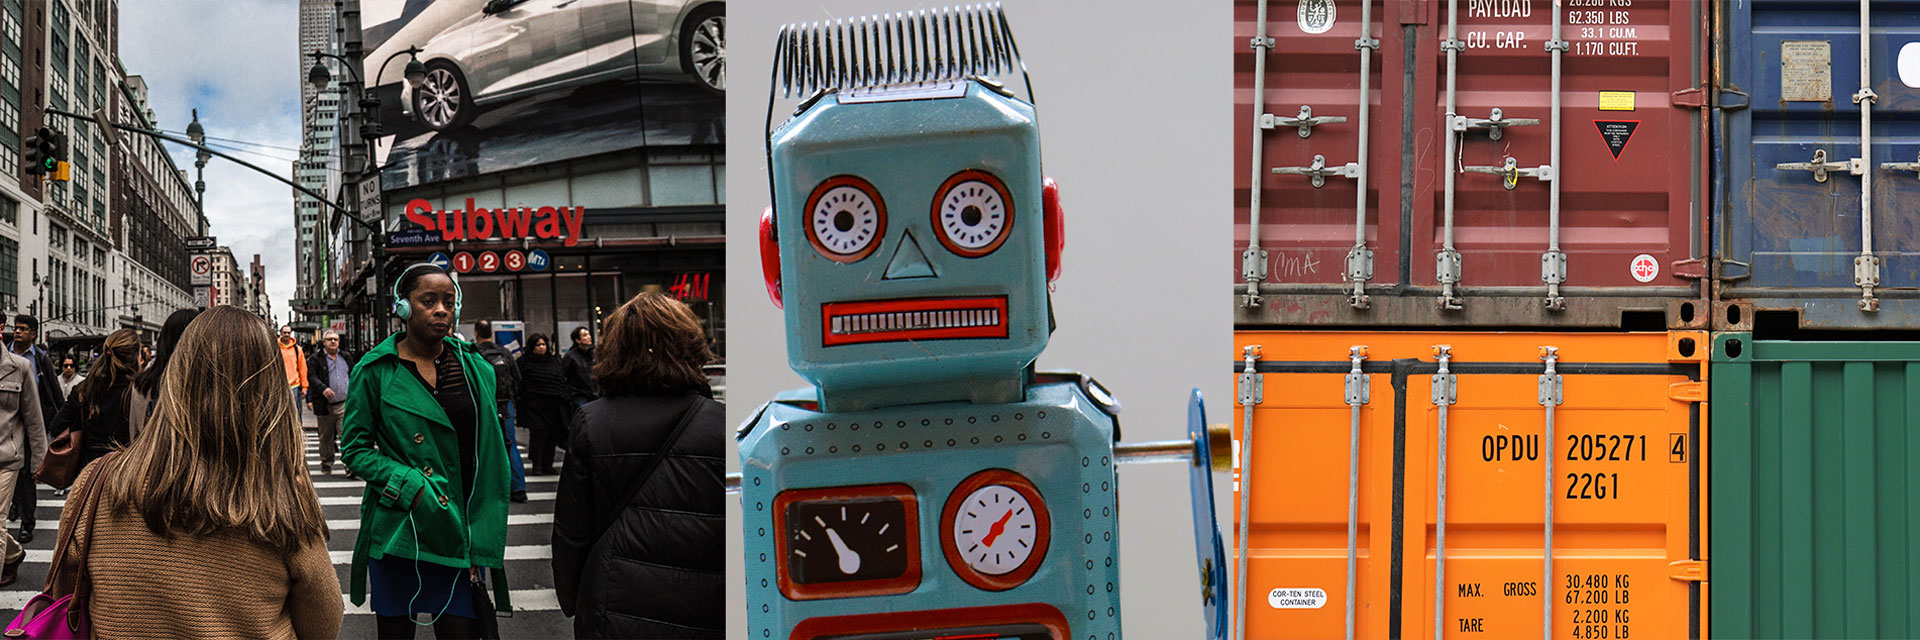 People on the street, a robot, and shipping containers: all symbols of PLED research.